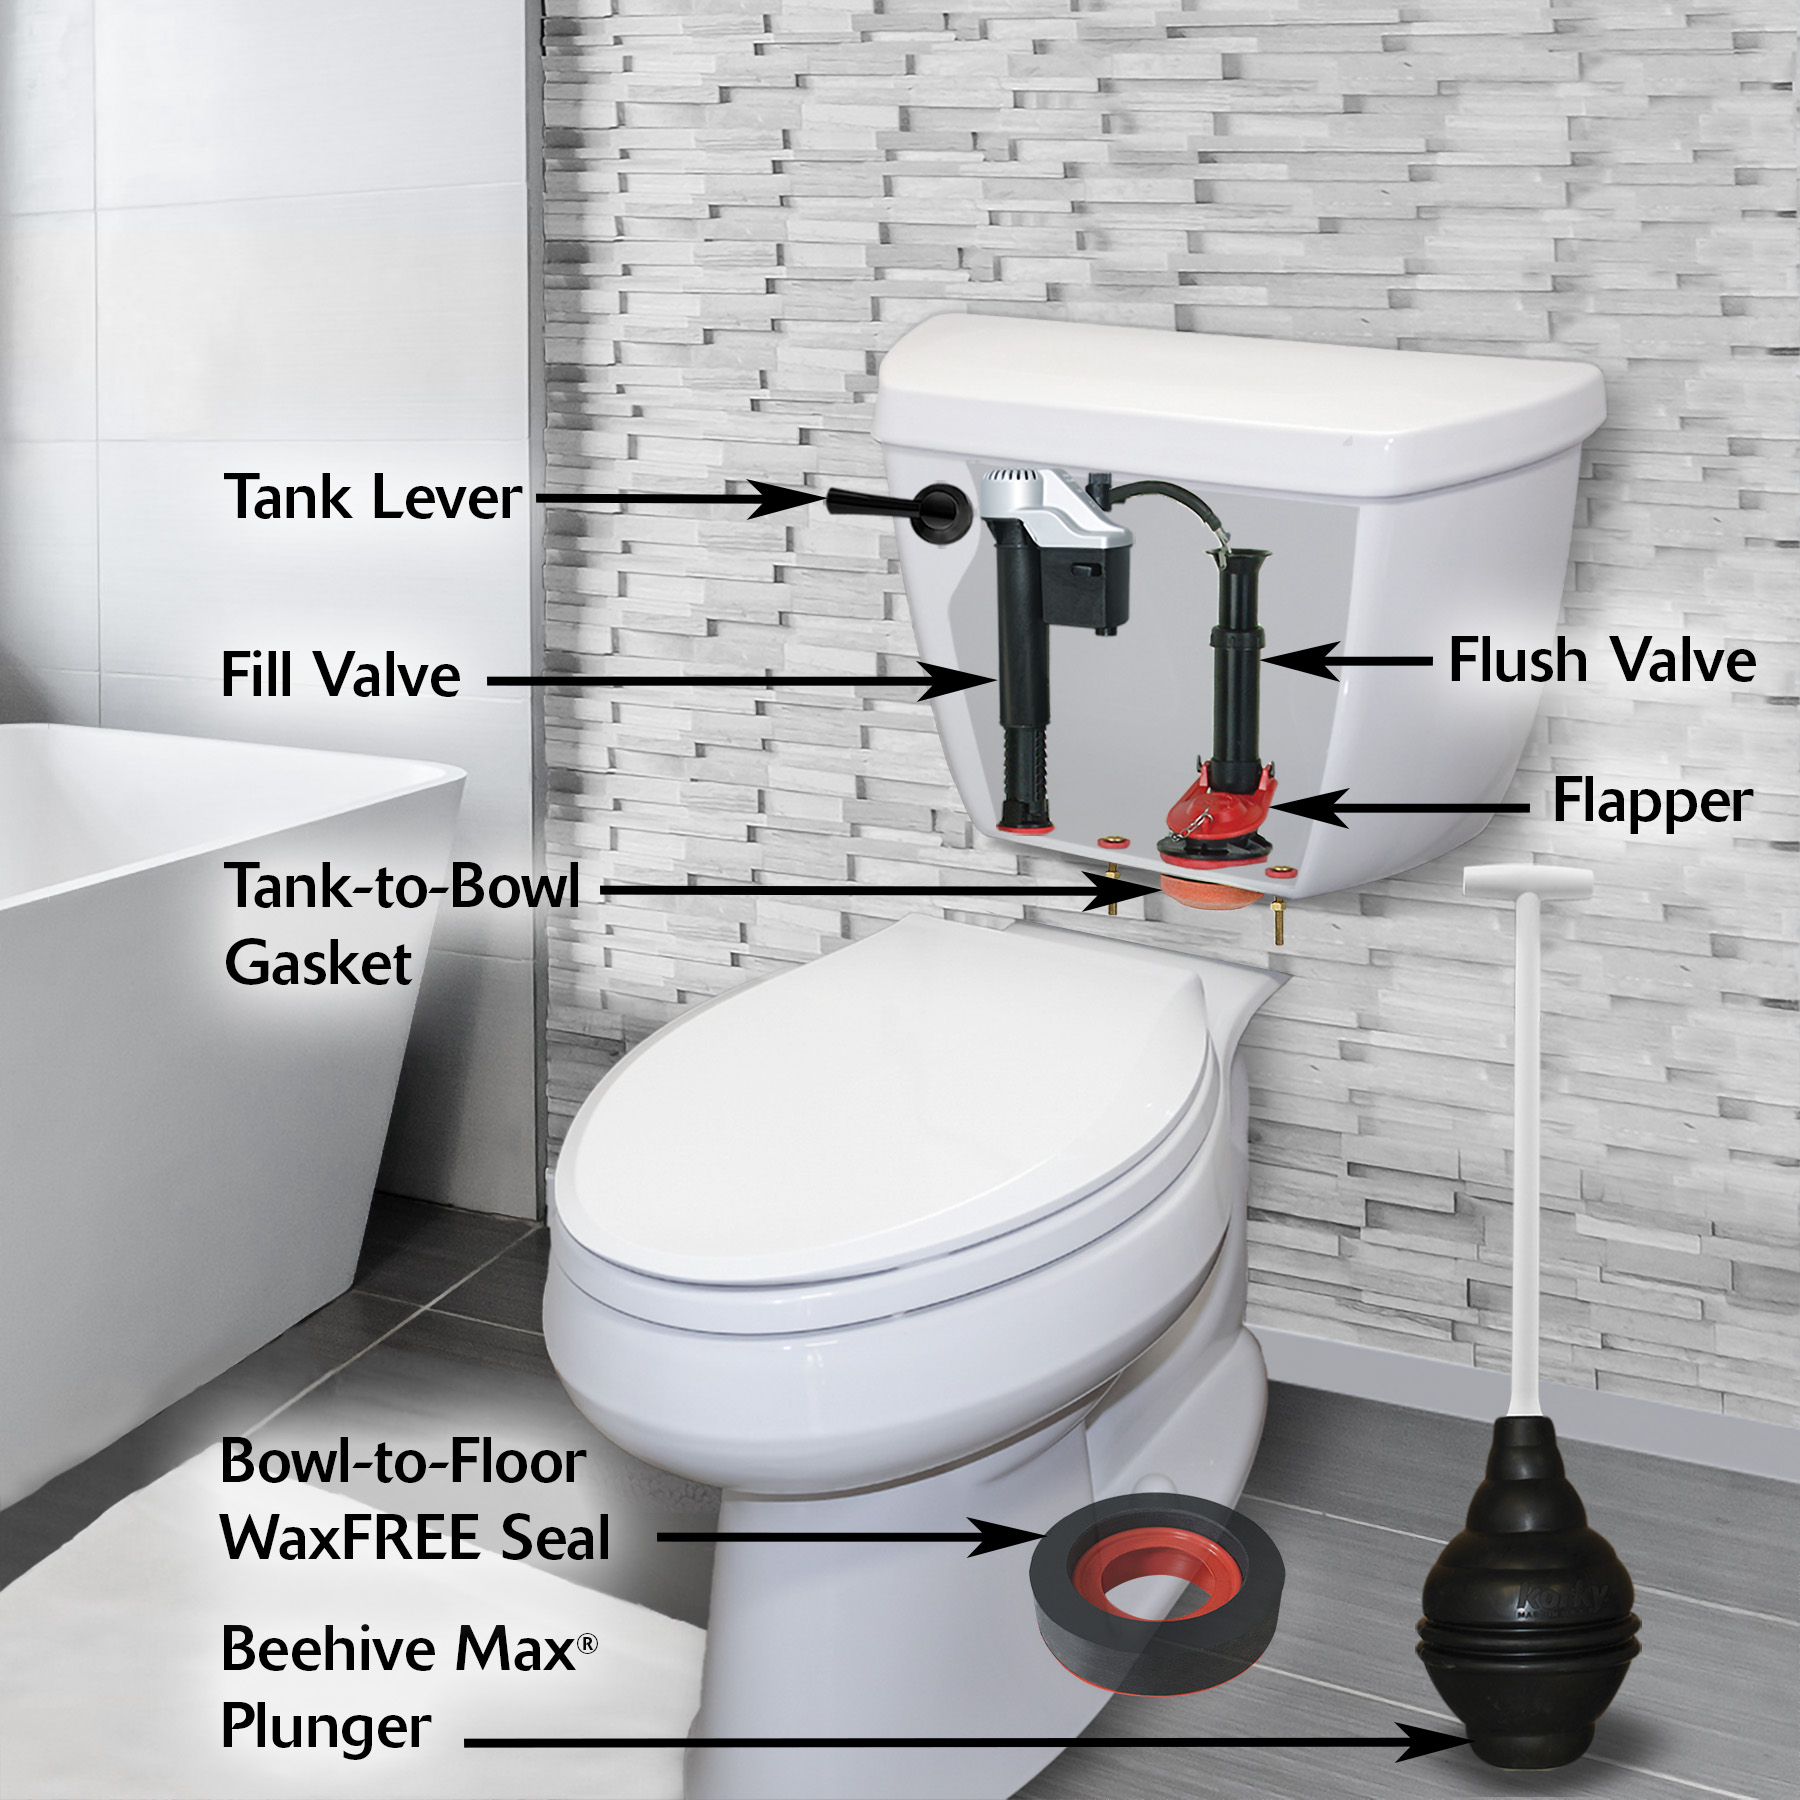 This image describes the components of a toilet tank, and how a toilet works